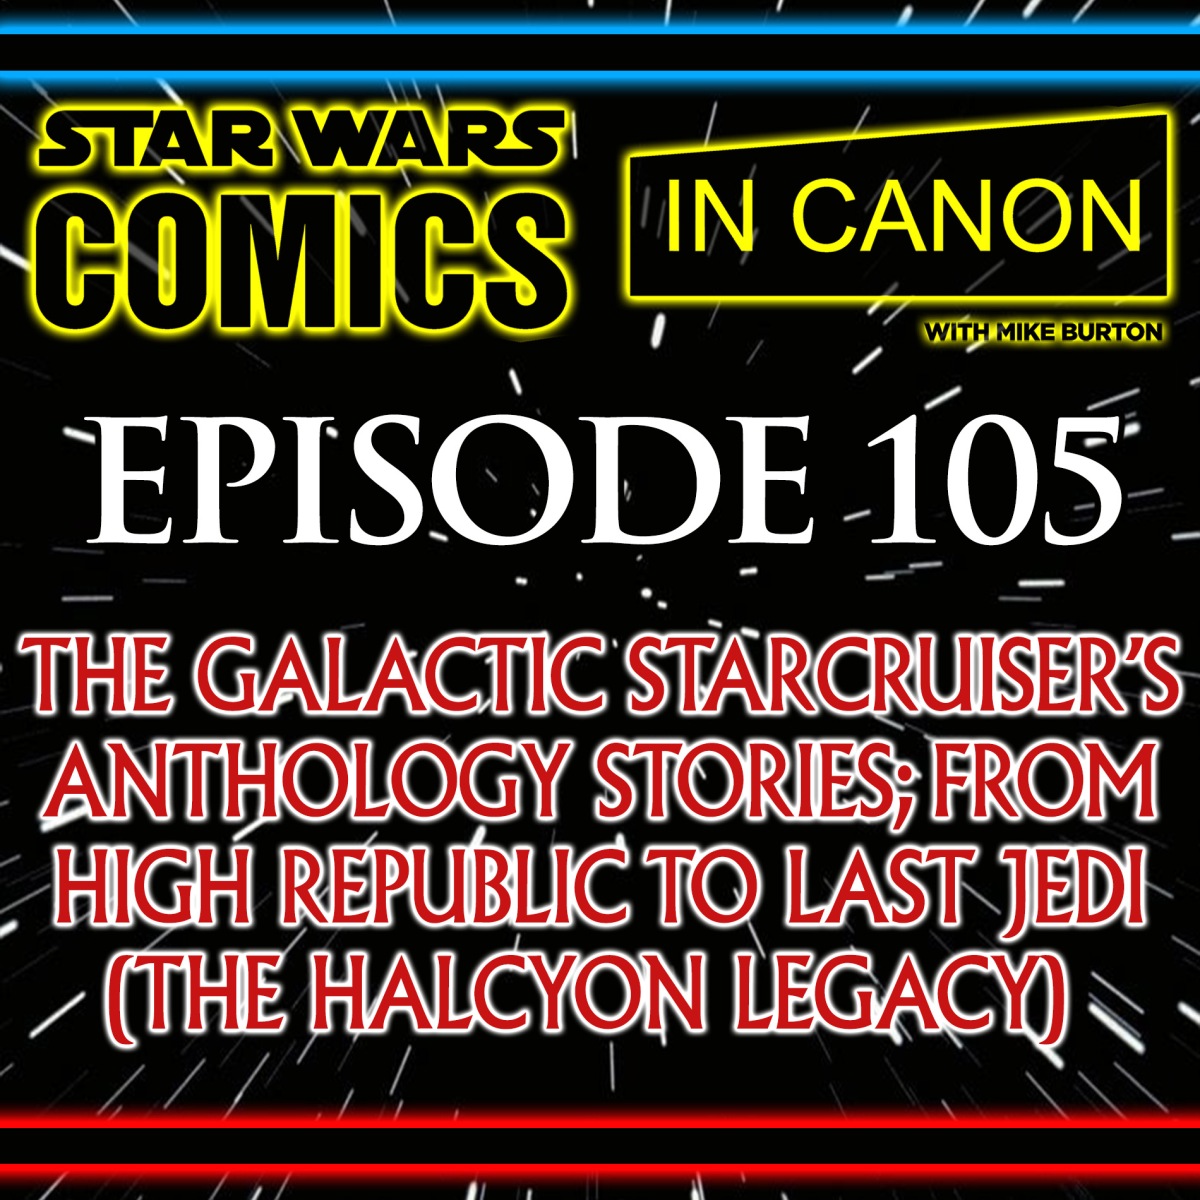 Star Wars: Comics In Canon – Halcyon Legacy: The Galactic Starcruiser’s Anthology Stories; From High Republic To Last Jedi, Including Burryaga, Aurra Sing, Hondo Ohnaka, Lando, Anakin, Padmé & More – Ep 105